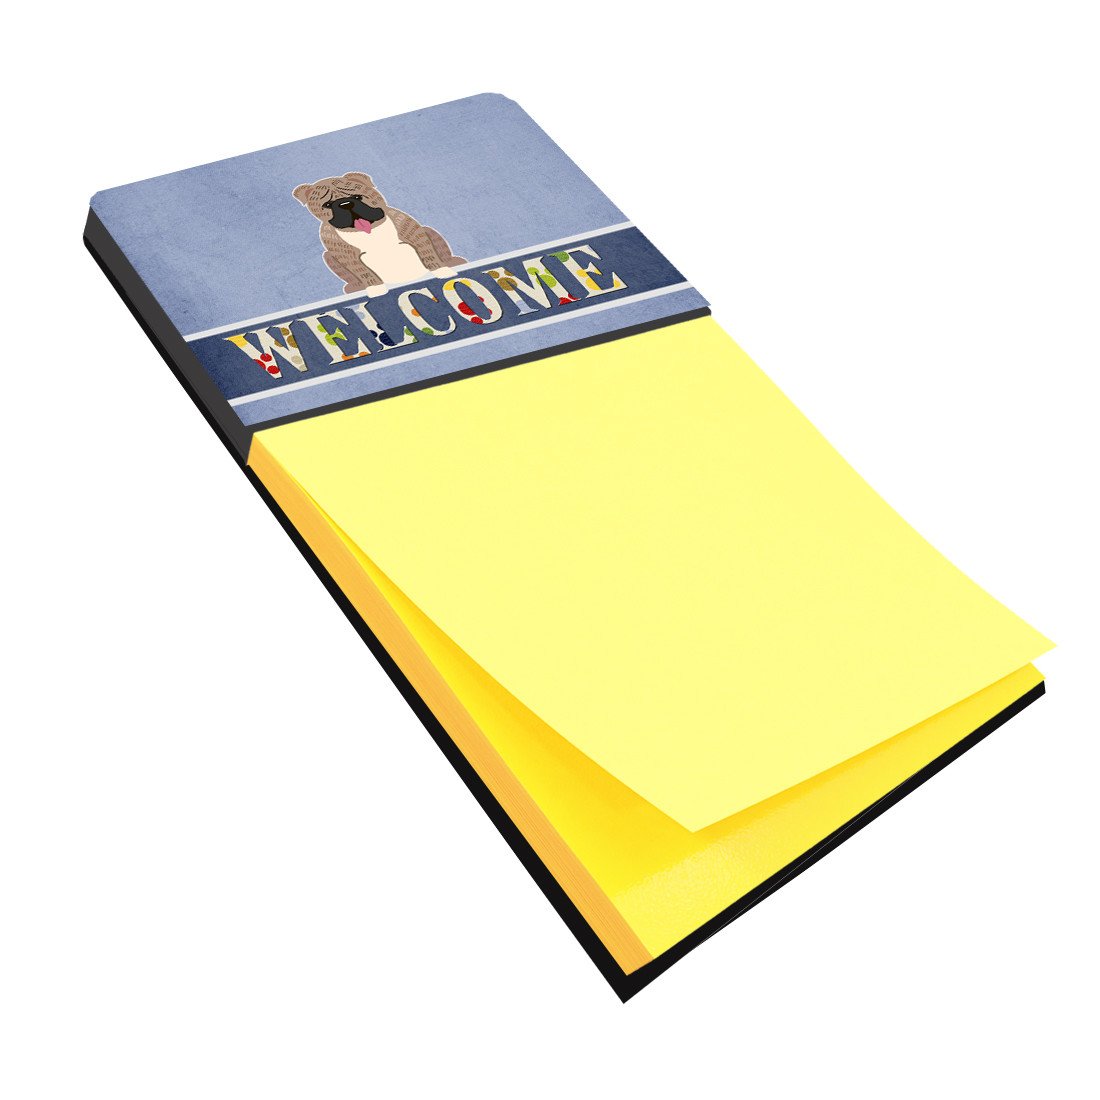 English Bulldog Grey Brindle  Welcome Sticky Note Holder BB5707SN by Caroline's Treasures